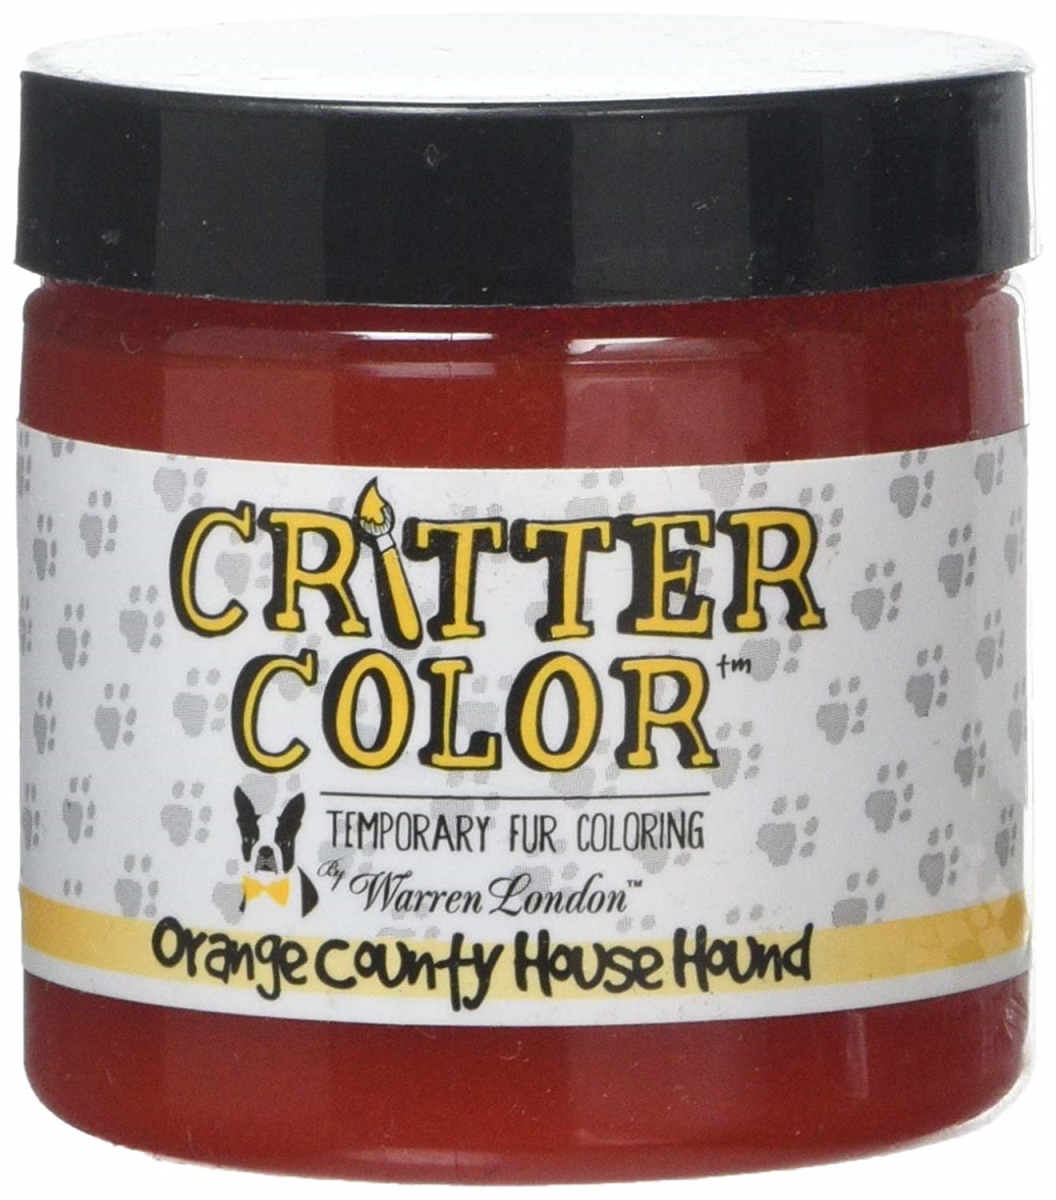 101806 Critter Color Temporary Fur Coloring For Dogs - Orange County House Hounds